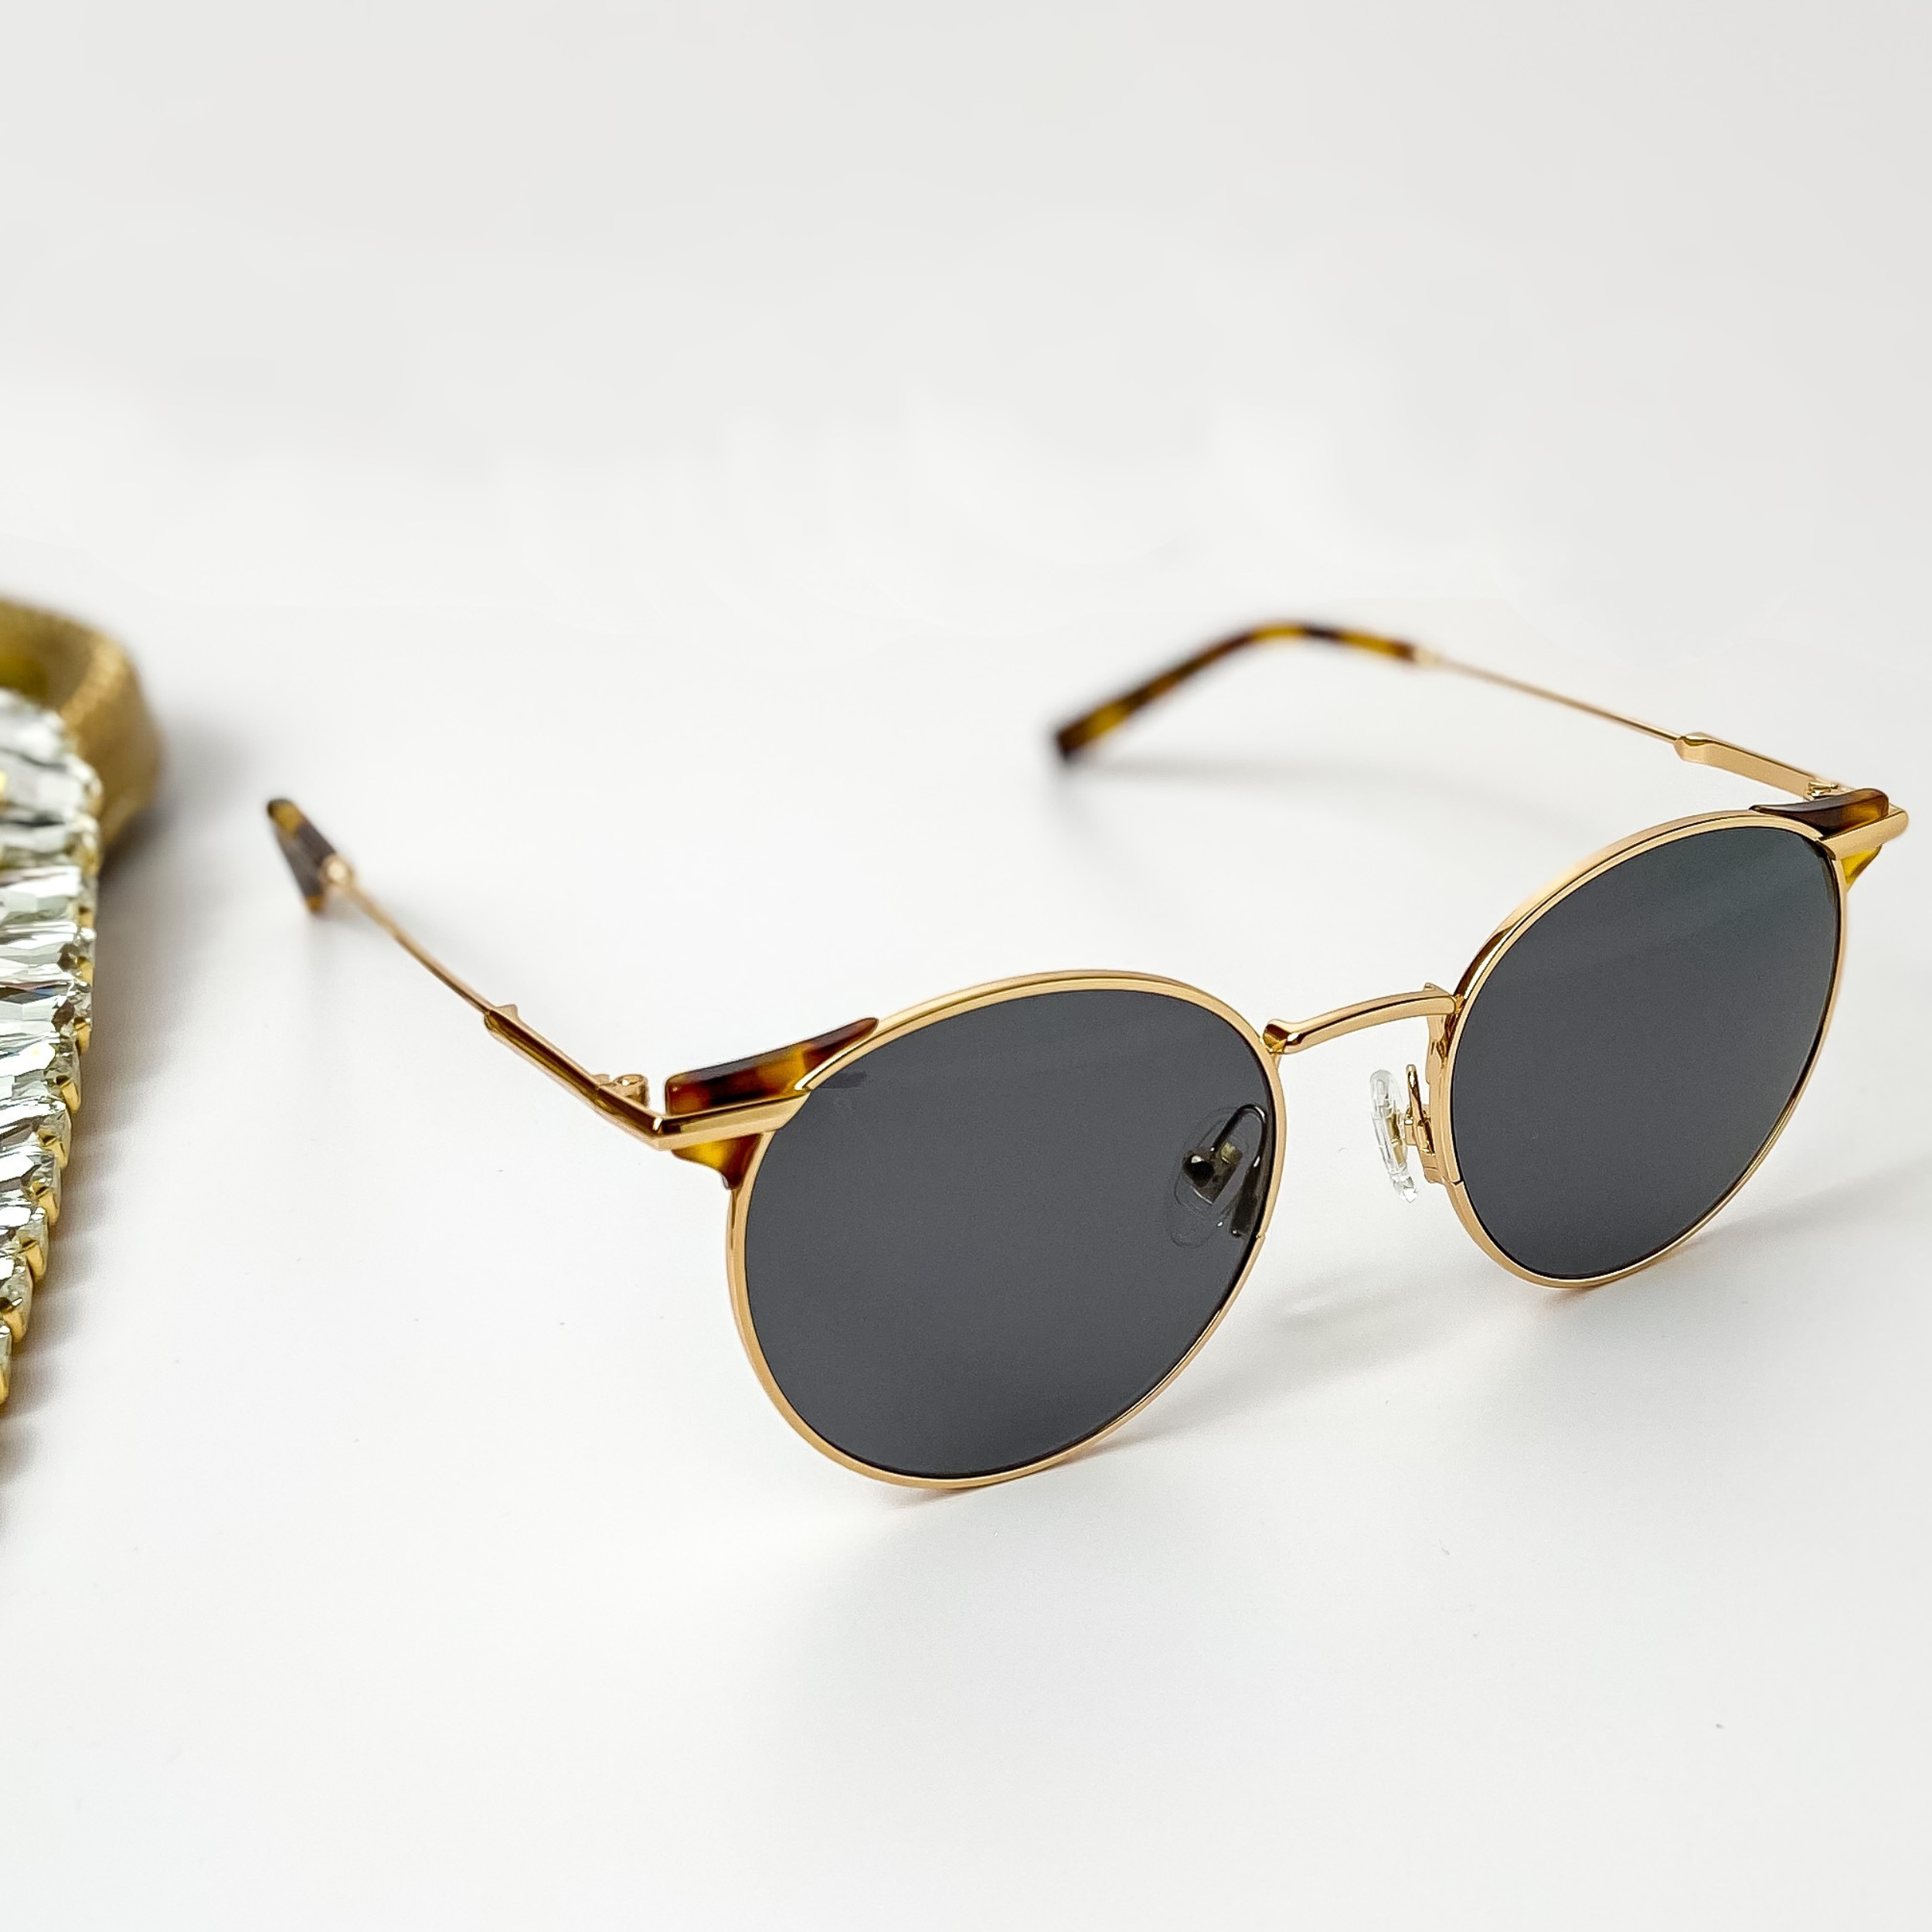 A pair of round sunglasses with grey lenses and gold tone frames. Pictured on a white background with gold jewelry.